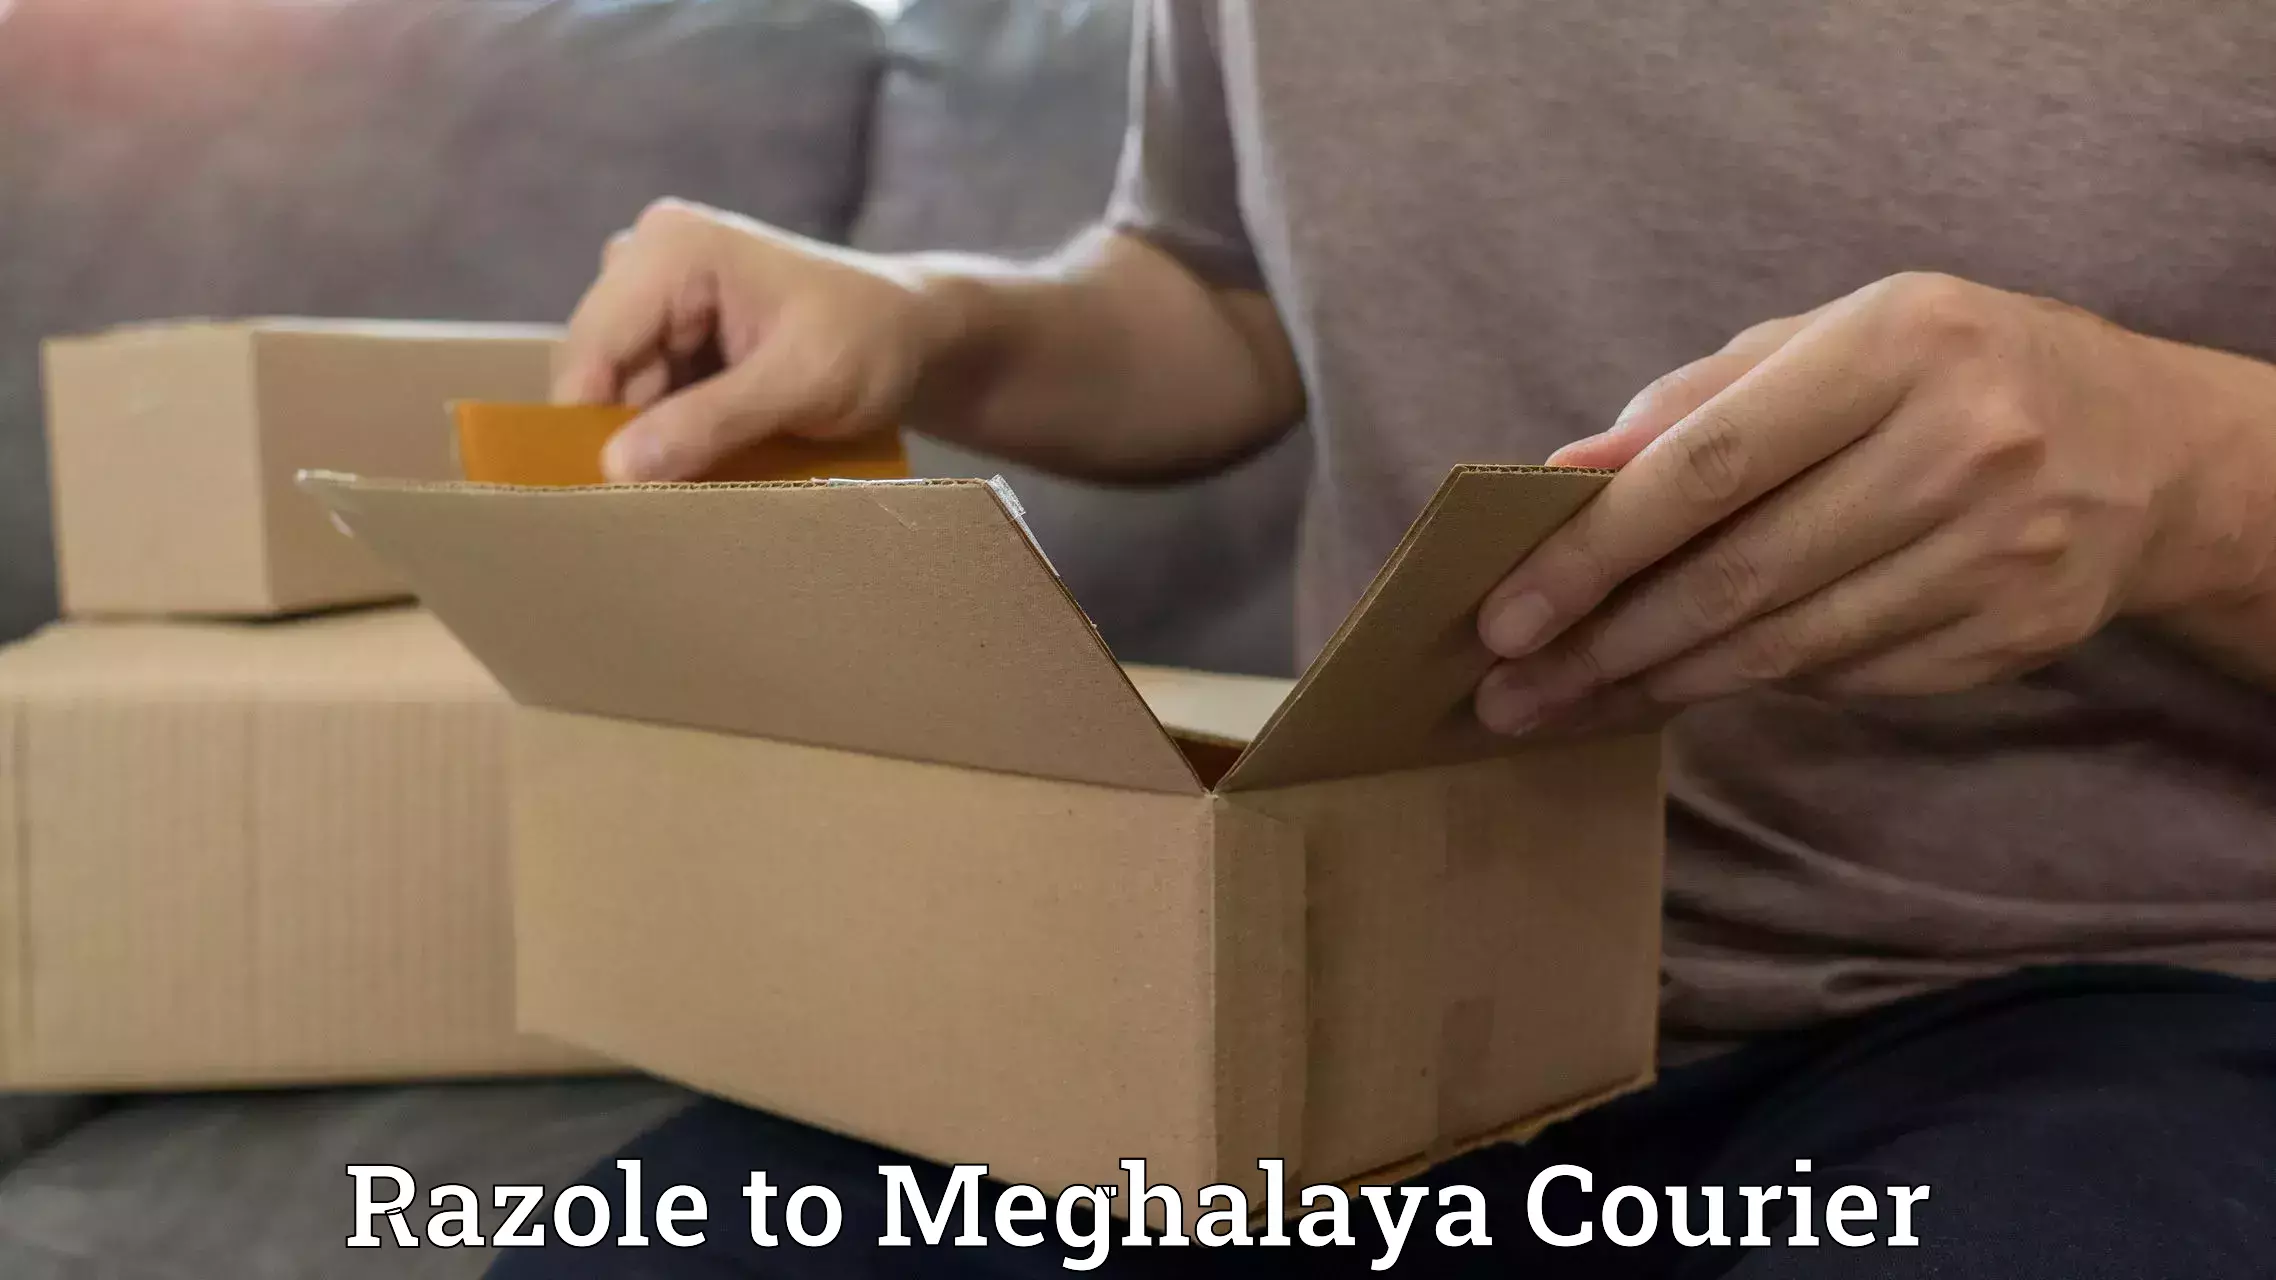 Efficient courier operations Razole to Meghalaya